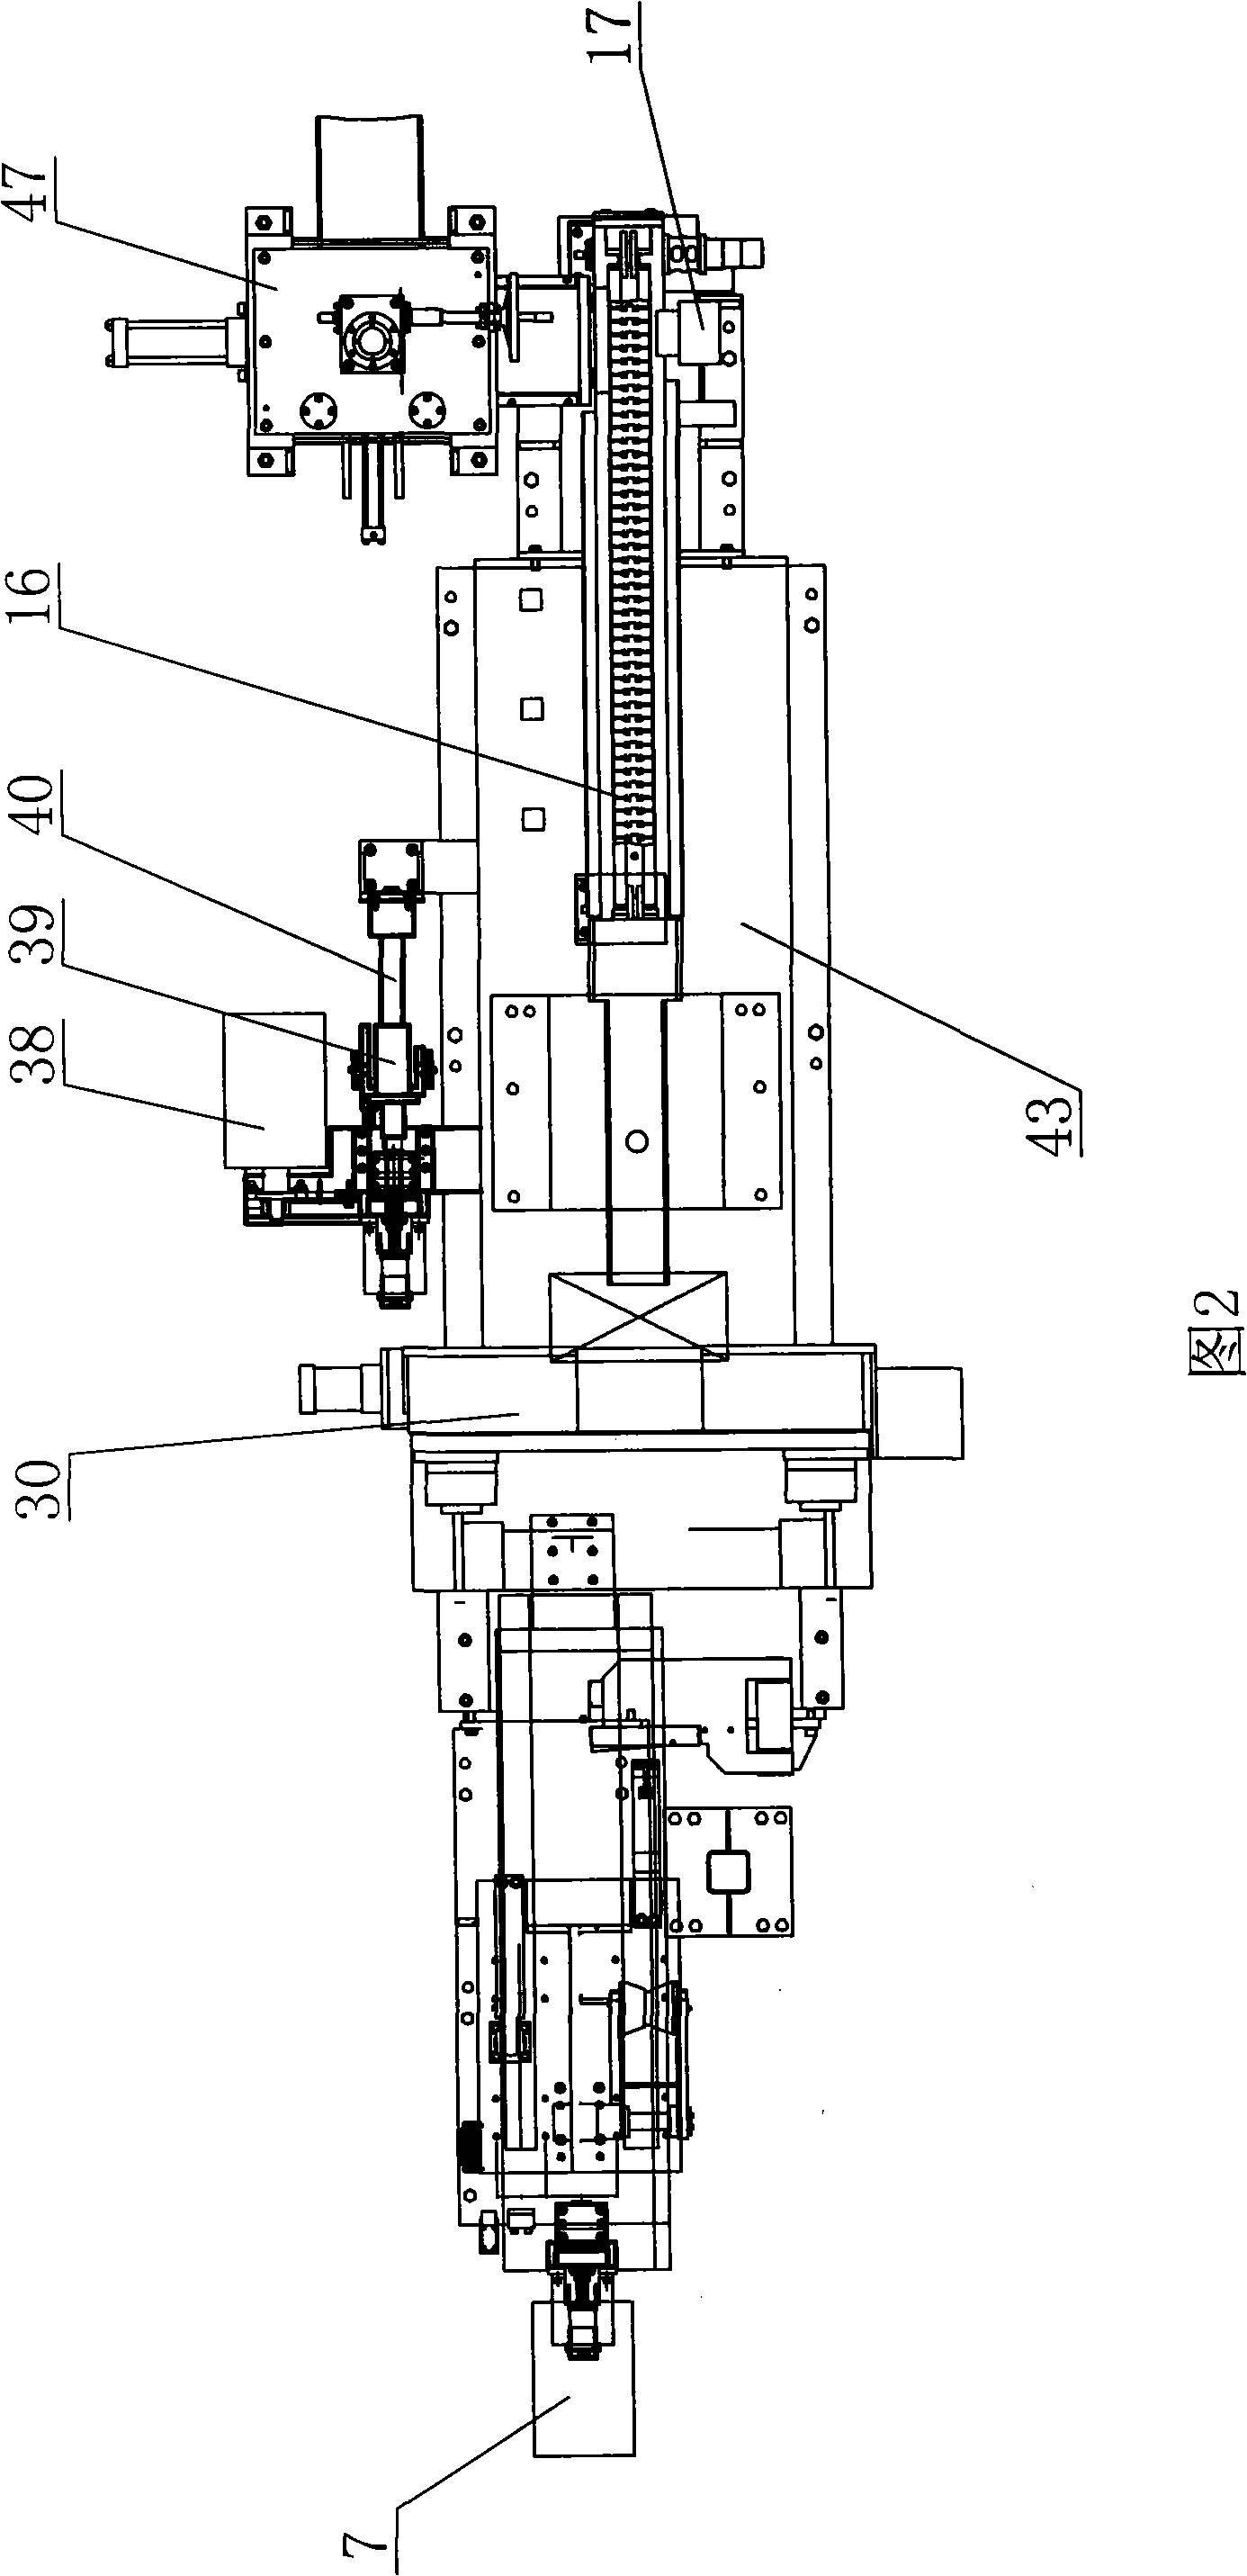 Machine tool for cutting pipe